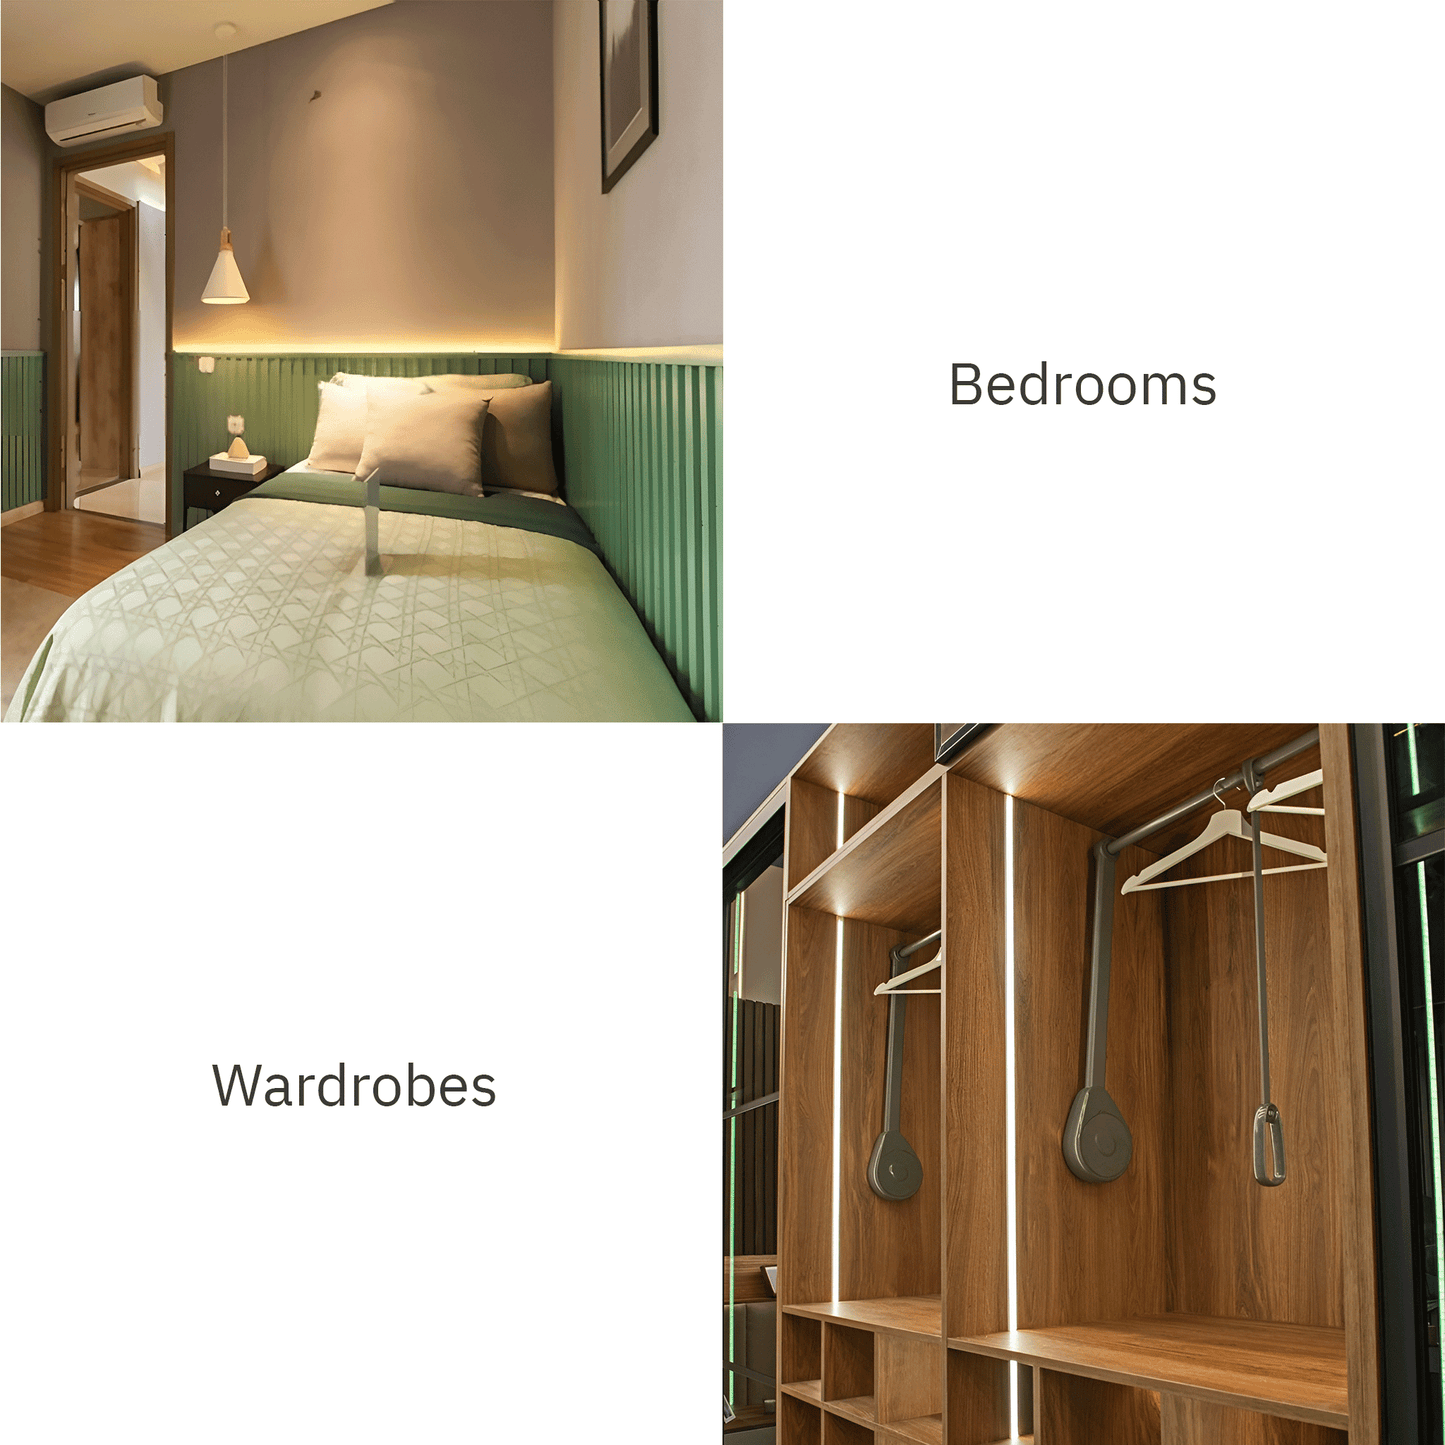 COB LED strips for bedrooms, wardrobes, cabinet and vanity mirrors